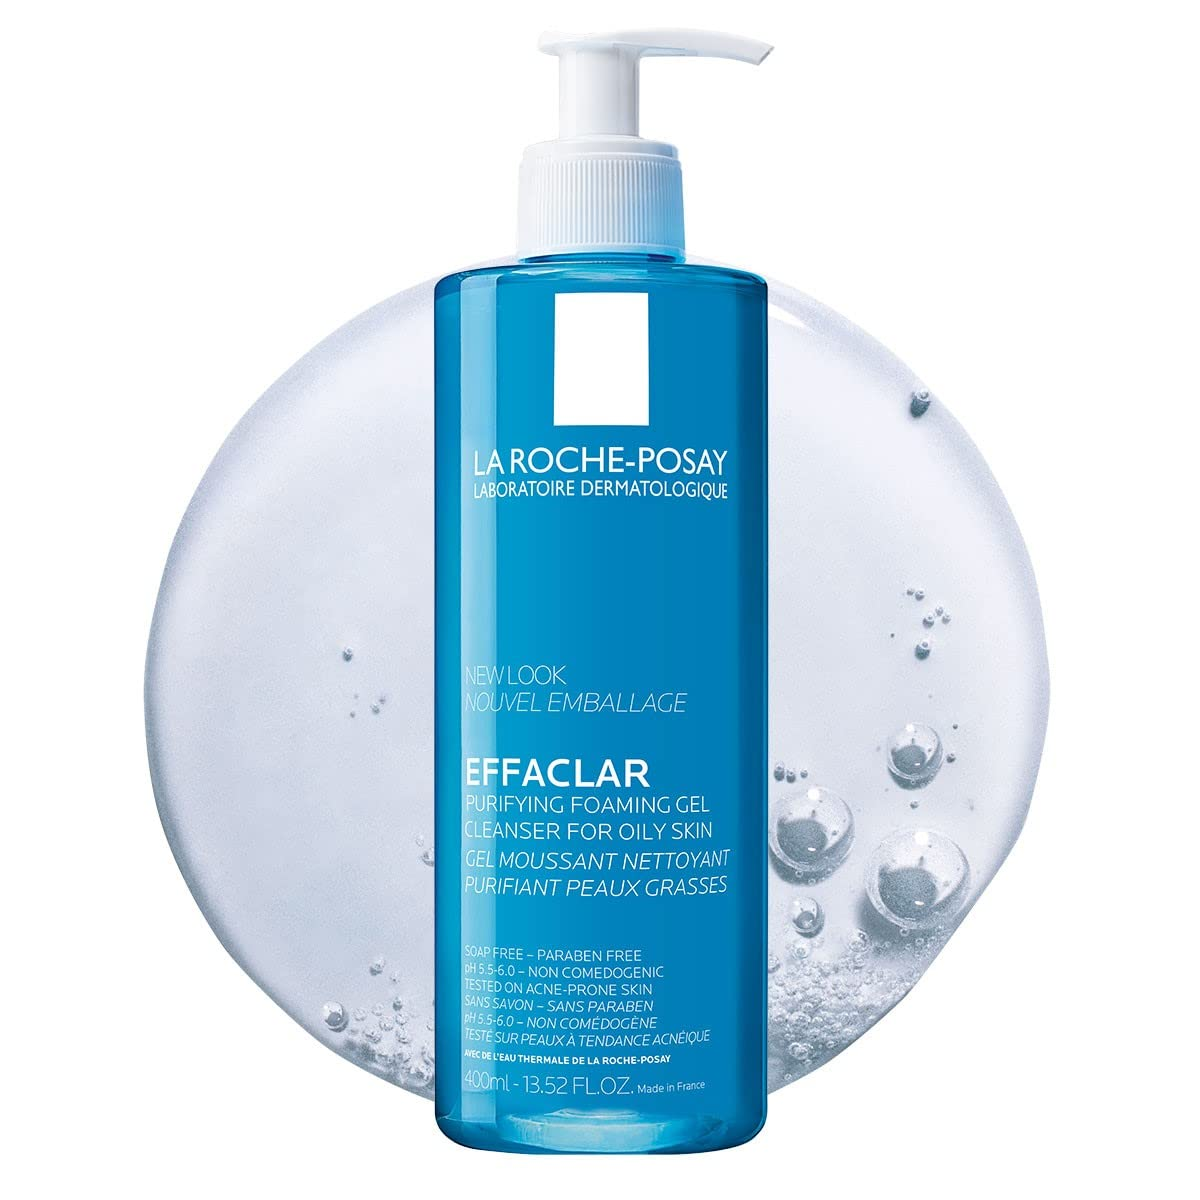 risks of sleeping with makeup on can  Reduce anti aging with La Roche-Posay Effaclar Purifying Foaming Gel Cleanser for Oily Skin, Alcohol Free Acne Face Wash Absorbing Deep Pore Cleanser Light Scent and Safe for Sensitive Skin